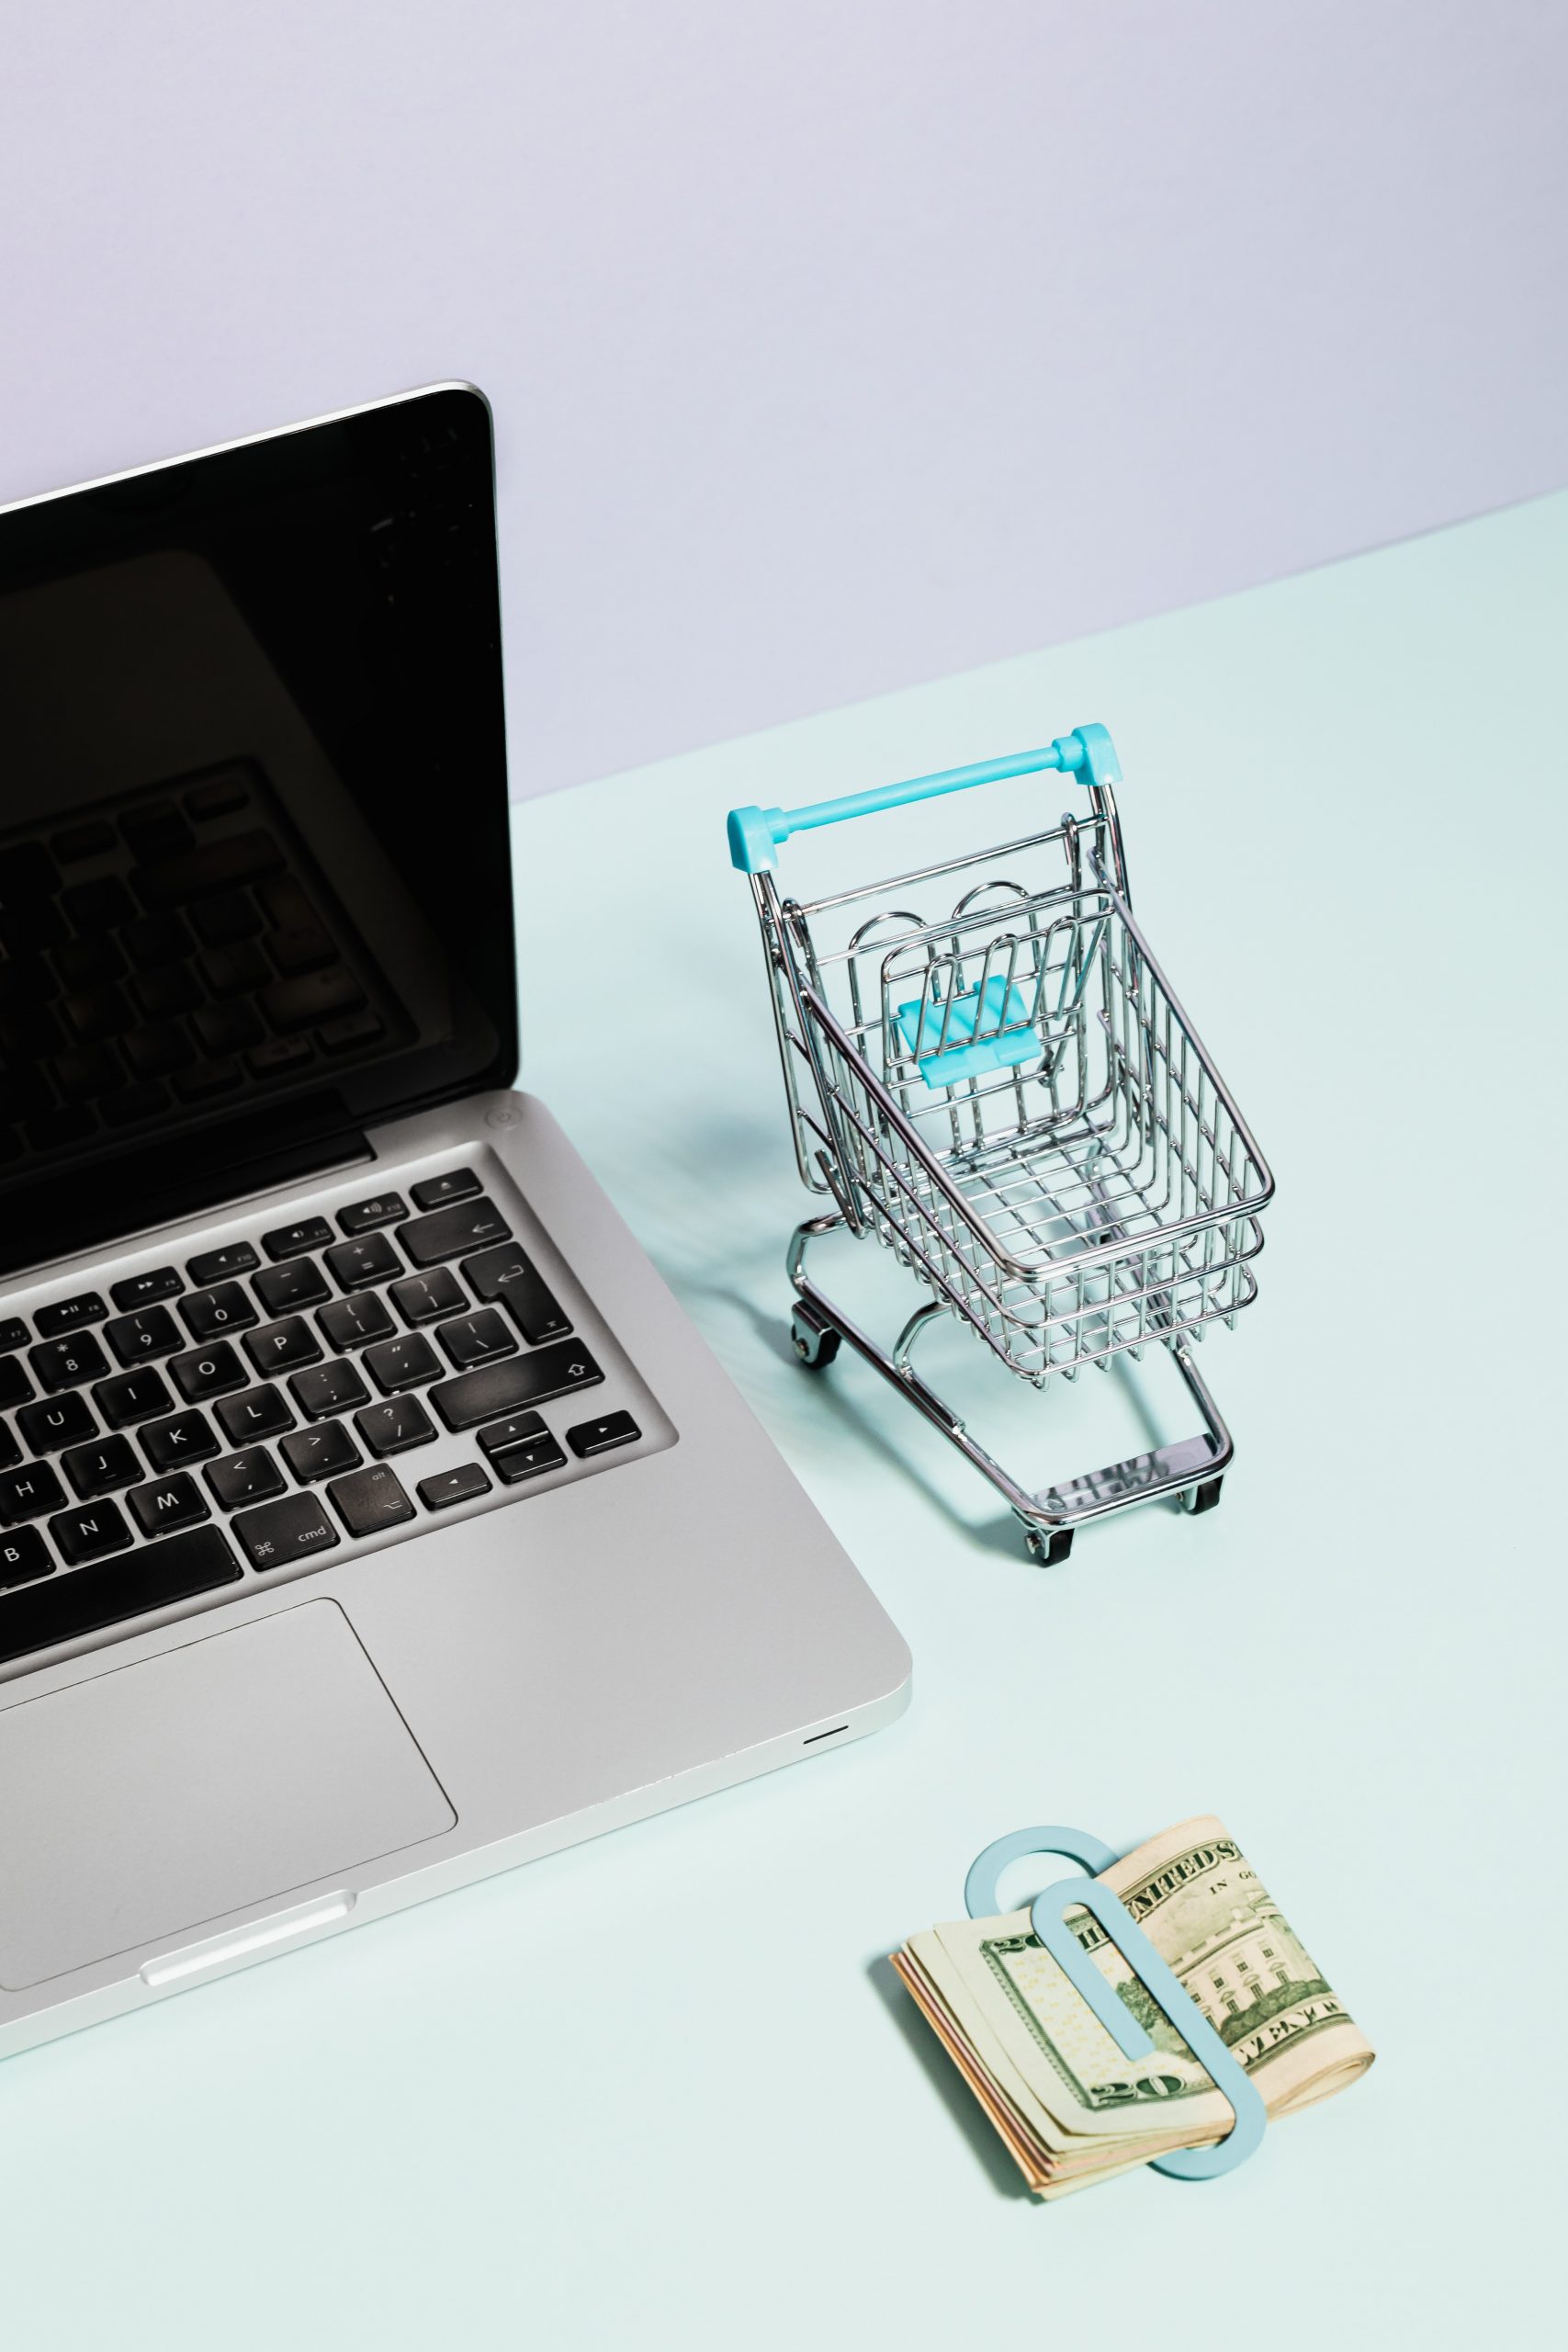 How To Run an E-commerce Flash Sale